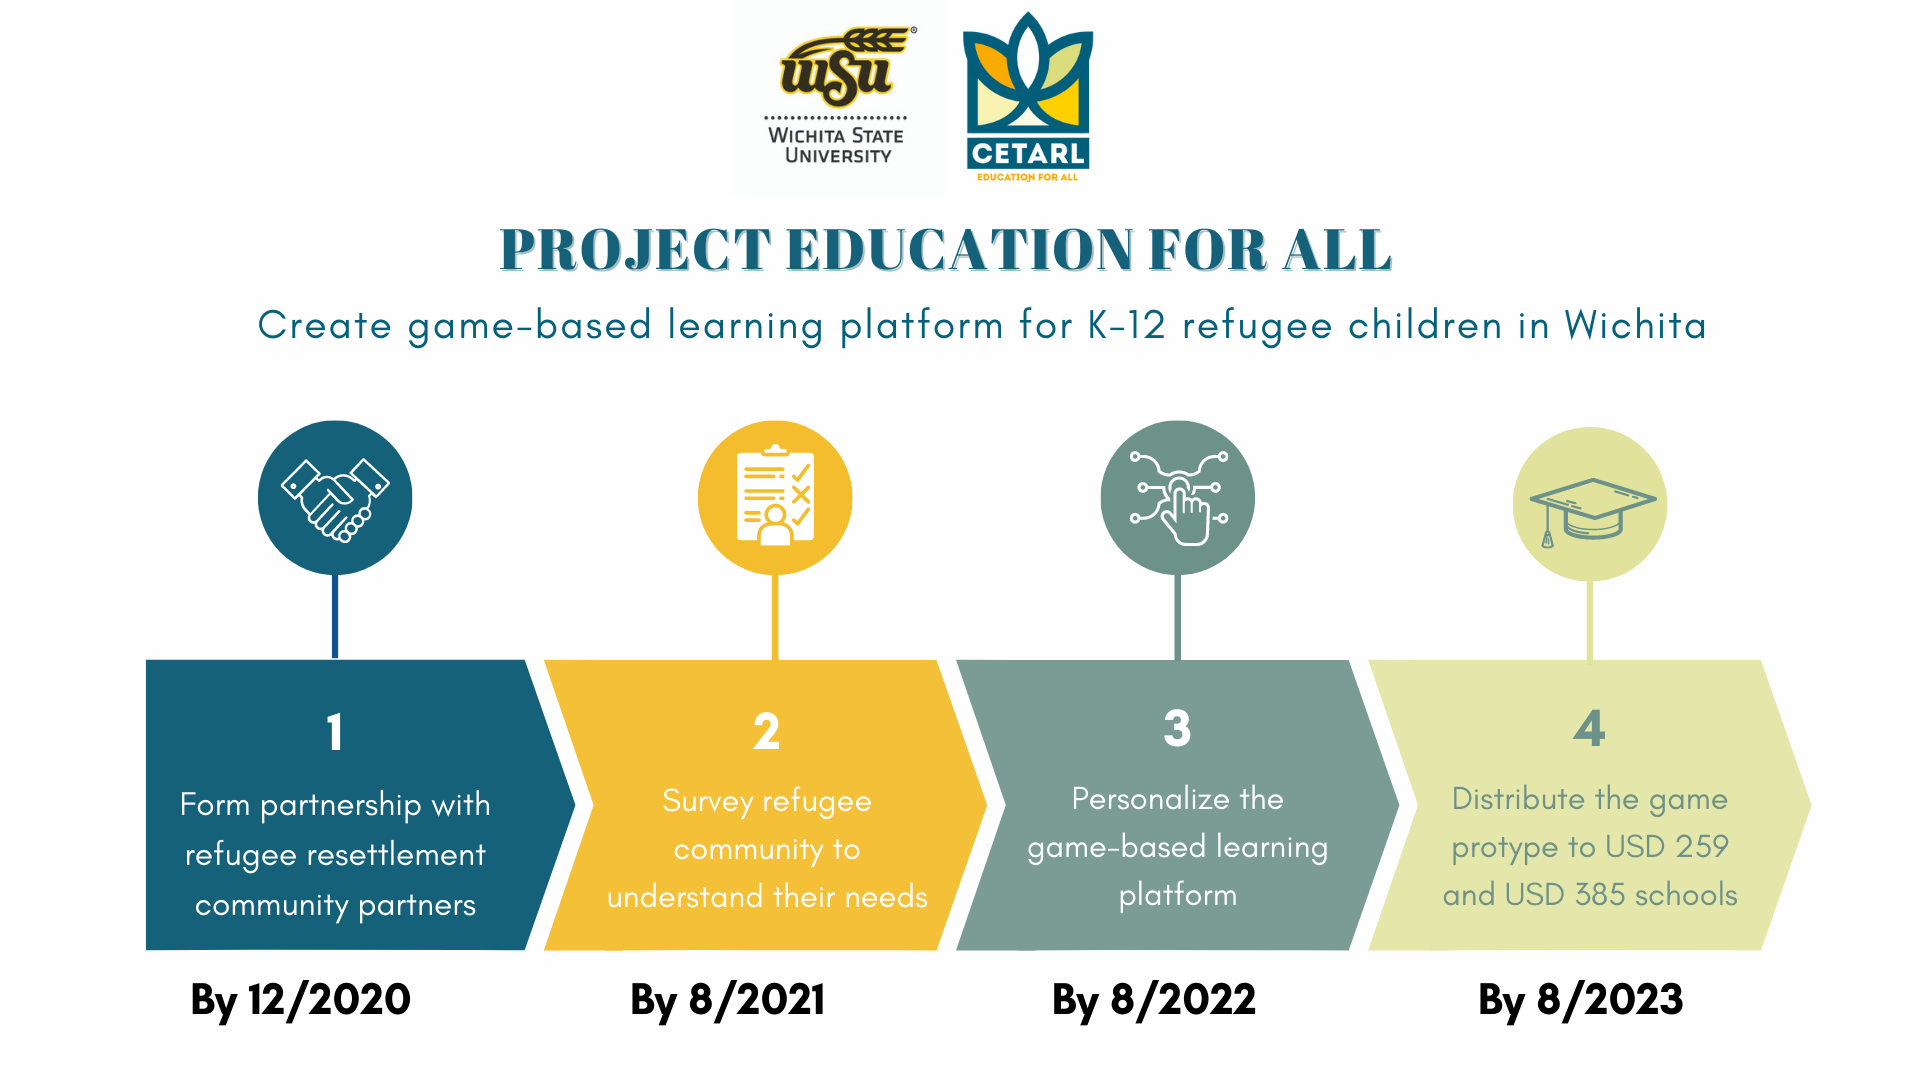 Chart: Project Education For All. Chart shows the project's implementation activities in 4 phrases from 2020 to 2023. Phrase 1, by 12/2020, form partnership with refugee resettlement community partners. Phrase 2, by 08/2021, survey refugee community to understand their needs. Phrase 3, by 8/2022, personalize the game-based learning platform. Phrase 4, by 8/2023, distribute the game protype to USD 259 and USD 385 schools.